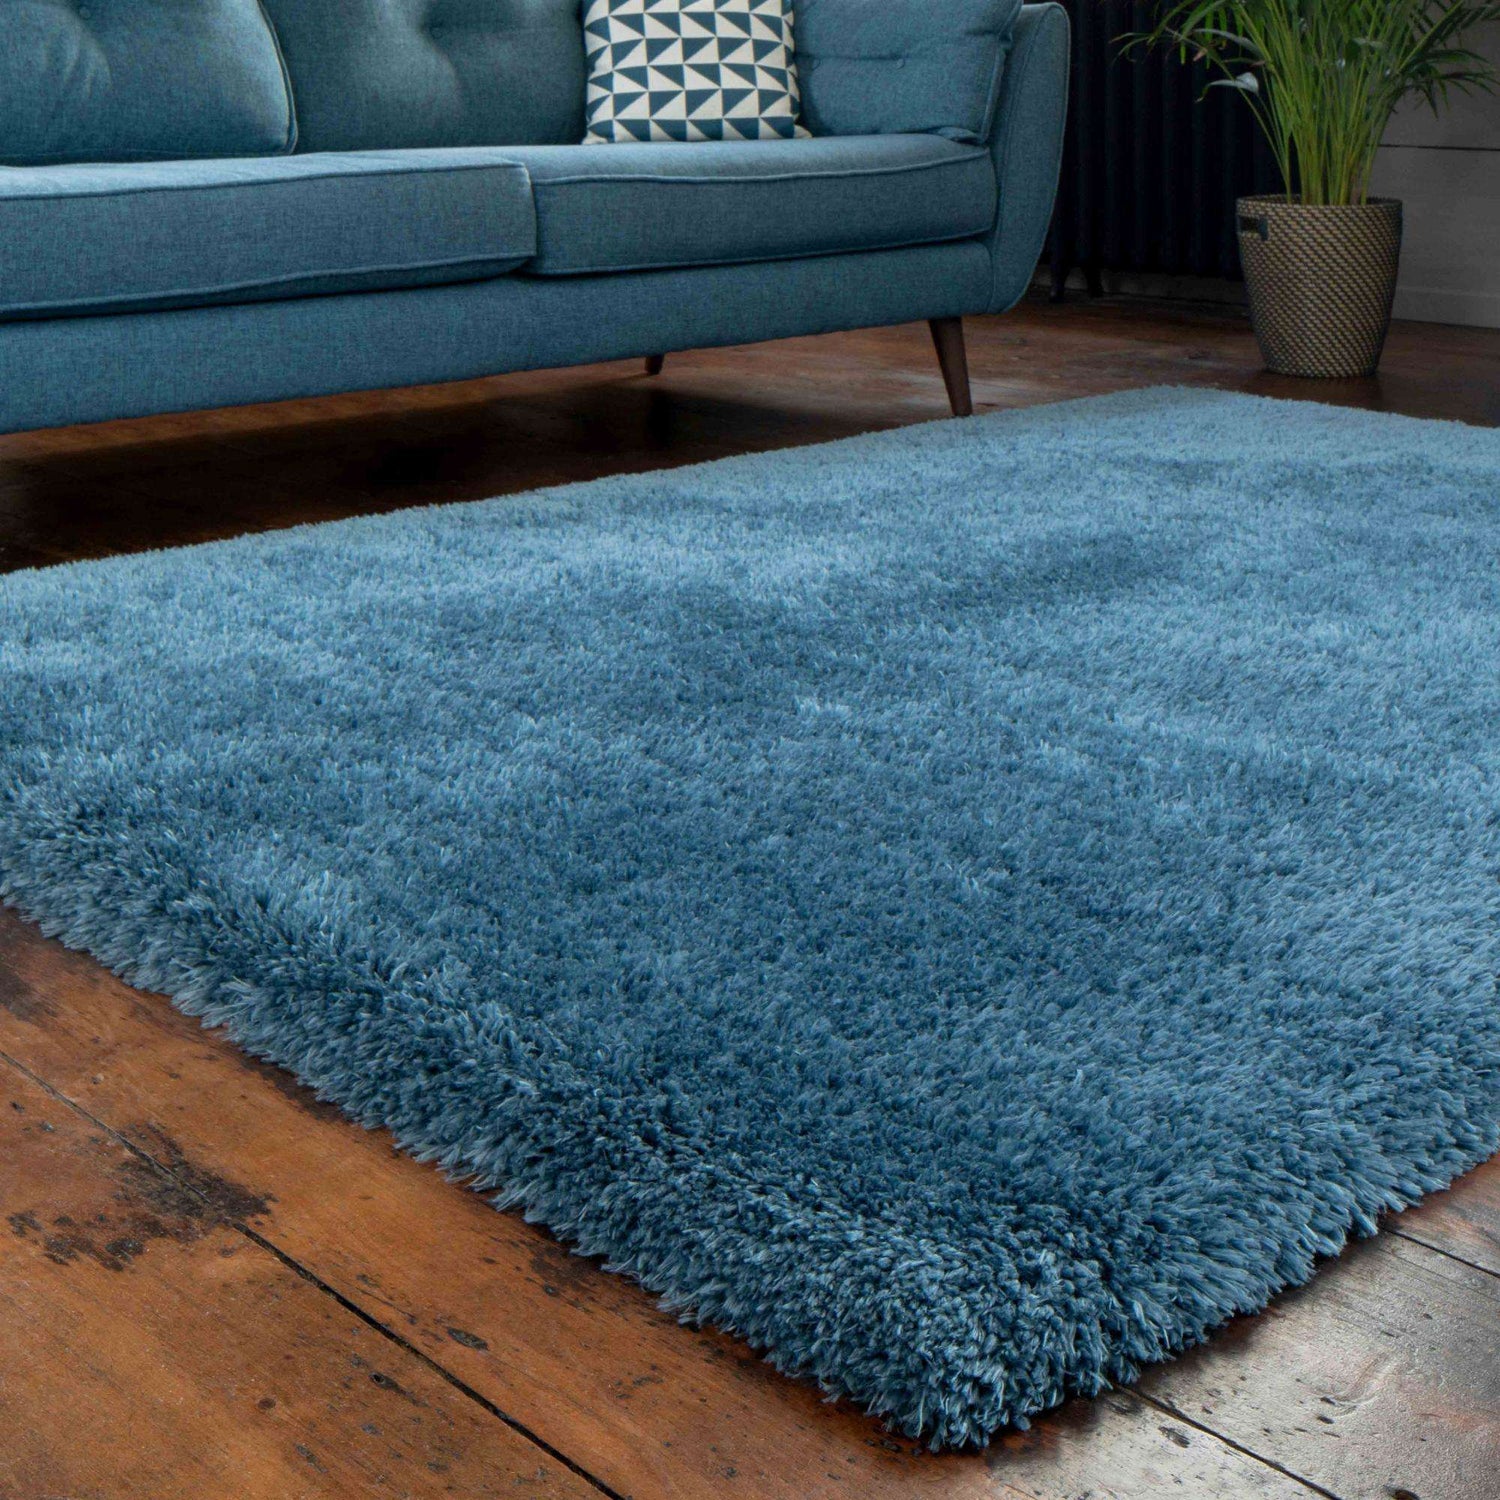 Deluxe Thick Soft Duck Egg Shaggy Bedroom Rug